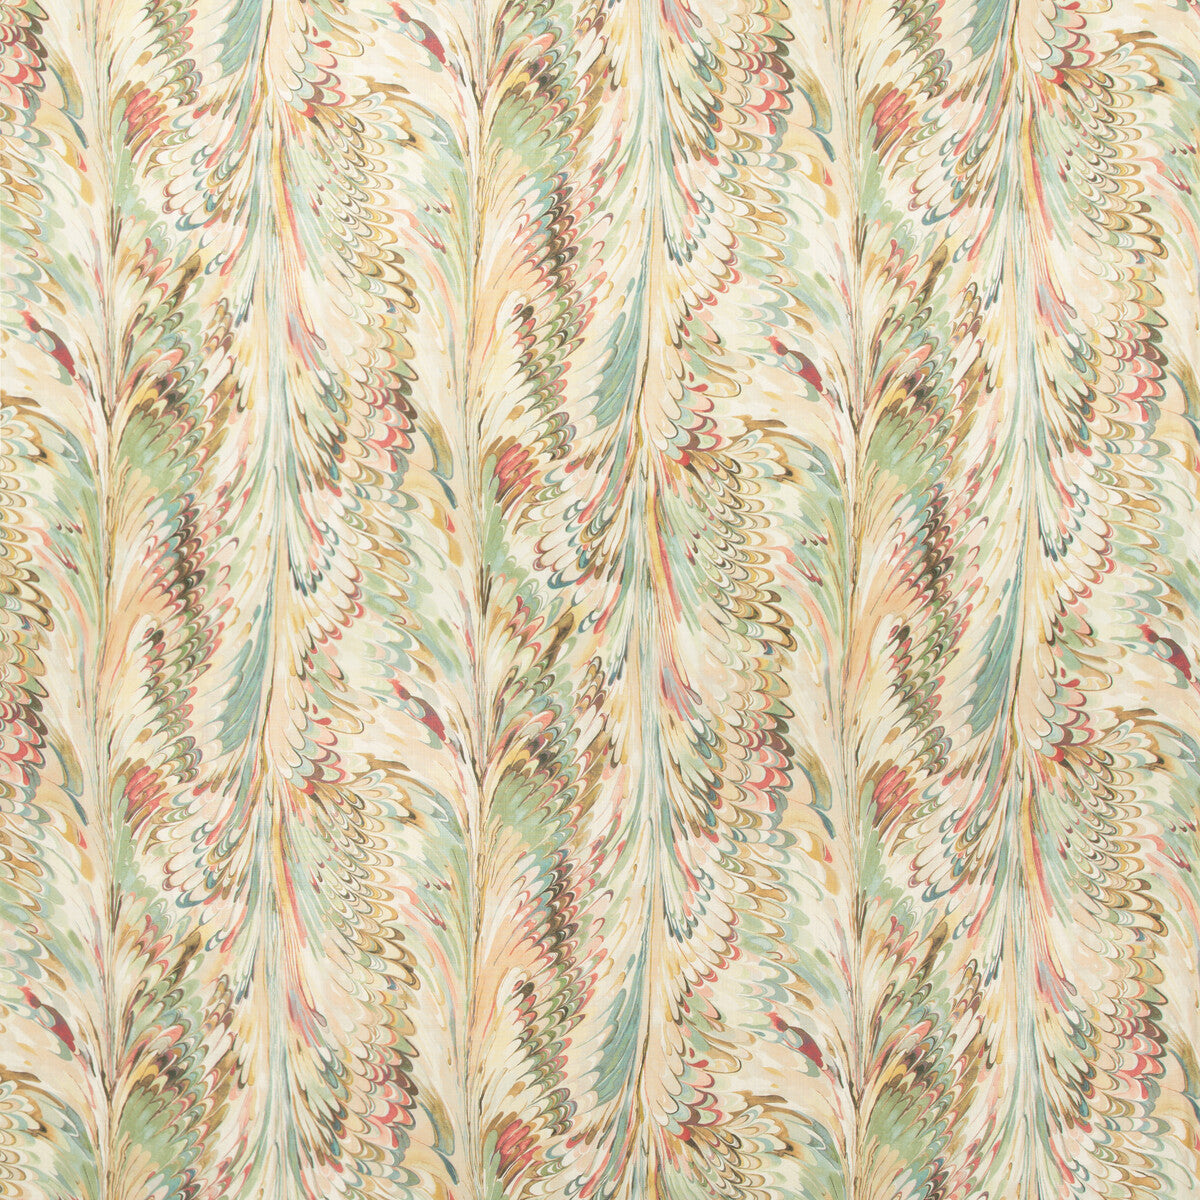 Taplow Print fabric in juniper/petal color - pattern 2019114.137.0 - by Lee Jofa in the Manor House collection